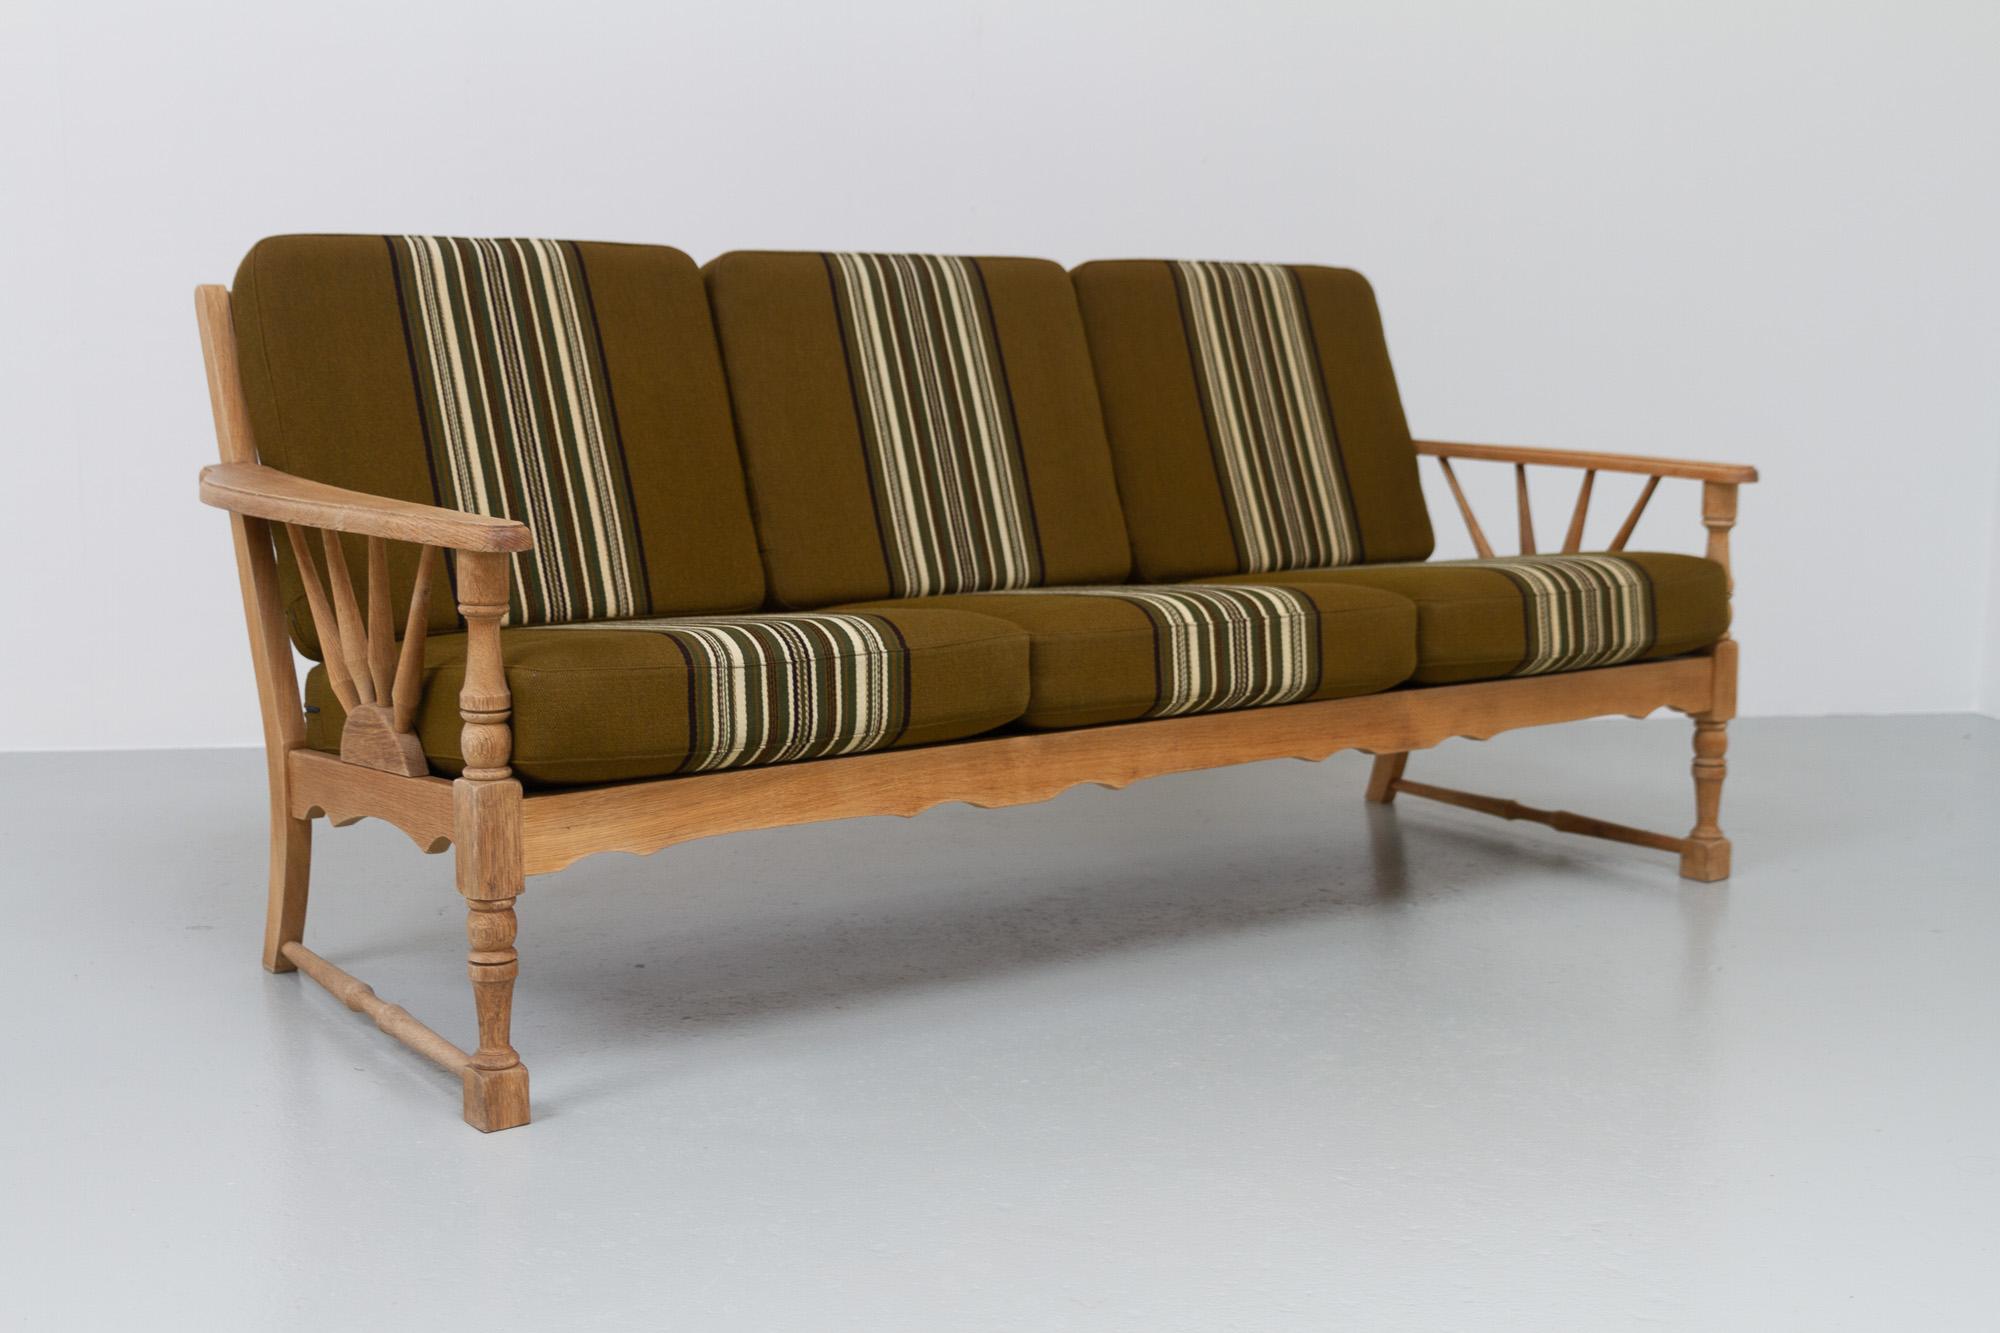 Vintage Danish Sofa in Oak, 1960s.
Danish Mid-Century Modern couch in solid oak with original cushions in wool upholstery.
Made in the 1960s by Danish cabinetmaker. Very likely designed by Henning Kjærnulf, Denmark (born Henry Kjærulff Rasmussen) as